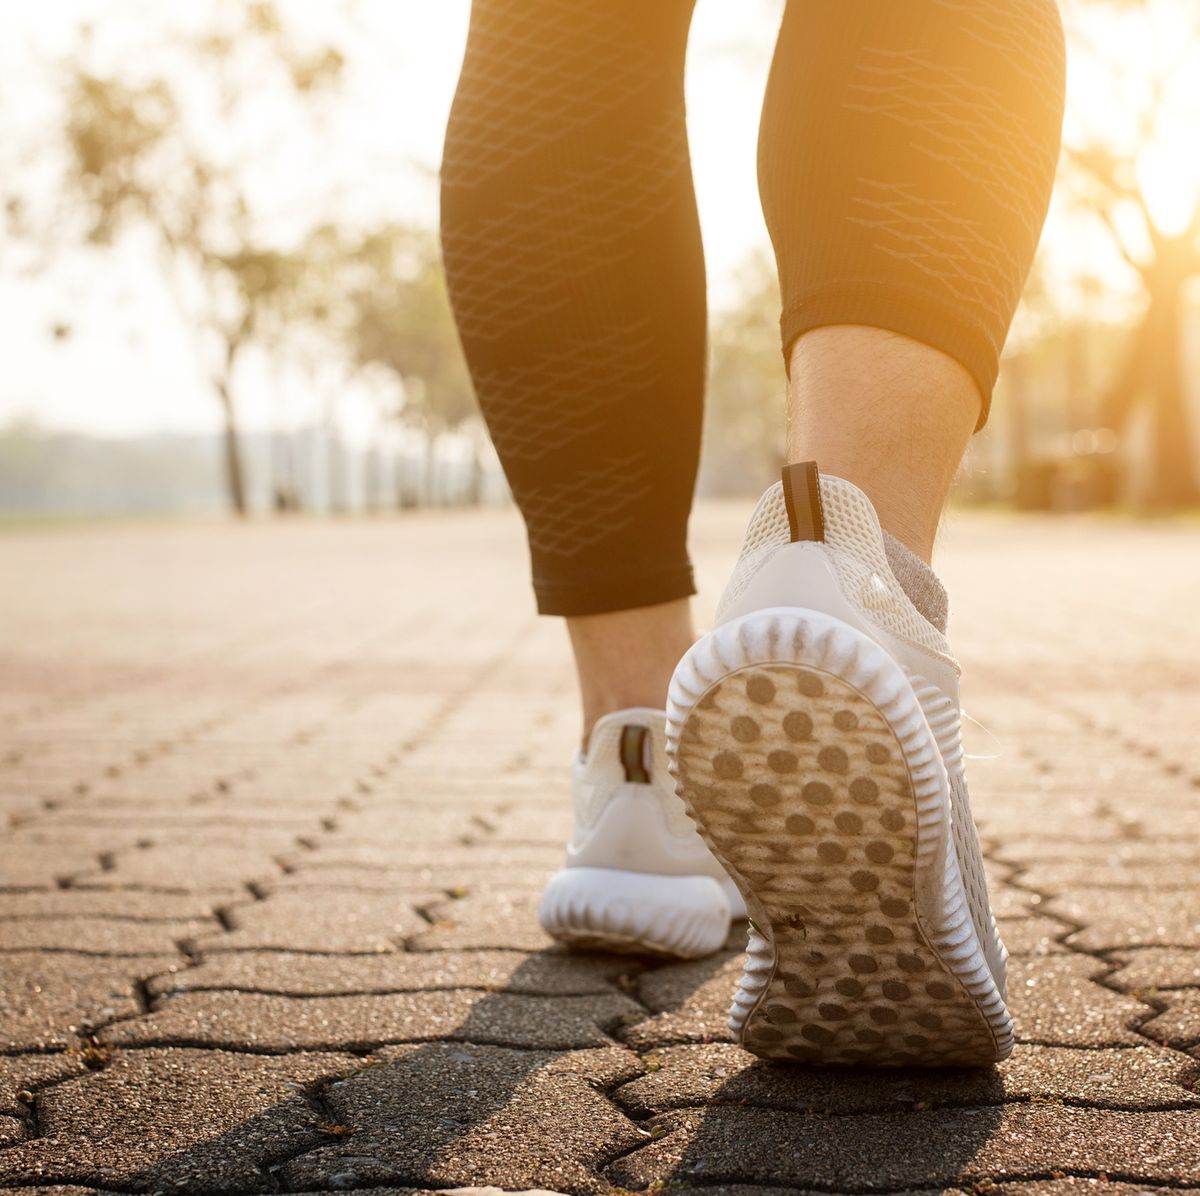 Calories Burned Walking: How to Calculate by Weight, Pace & Time